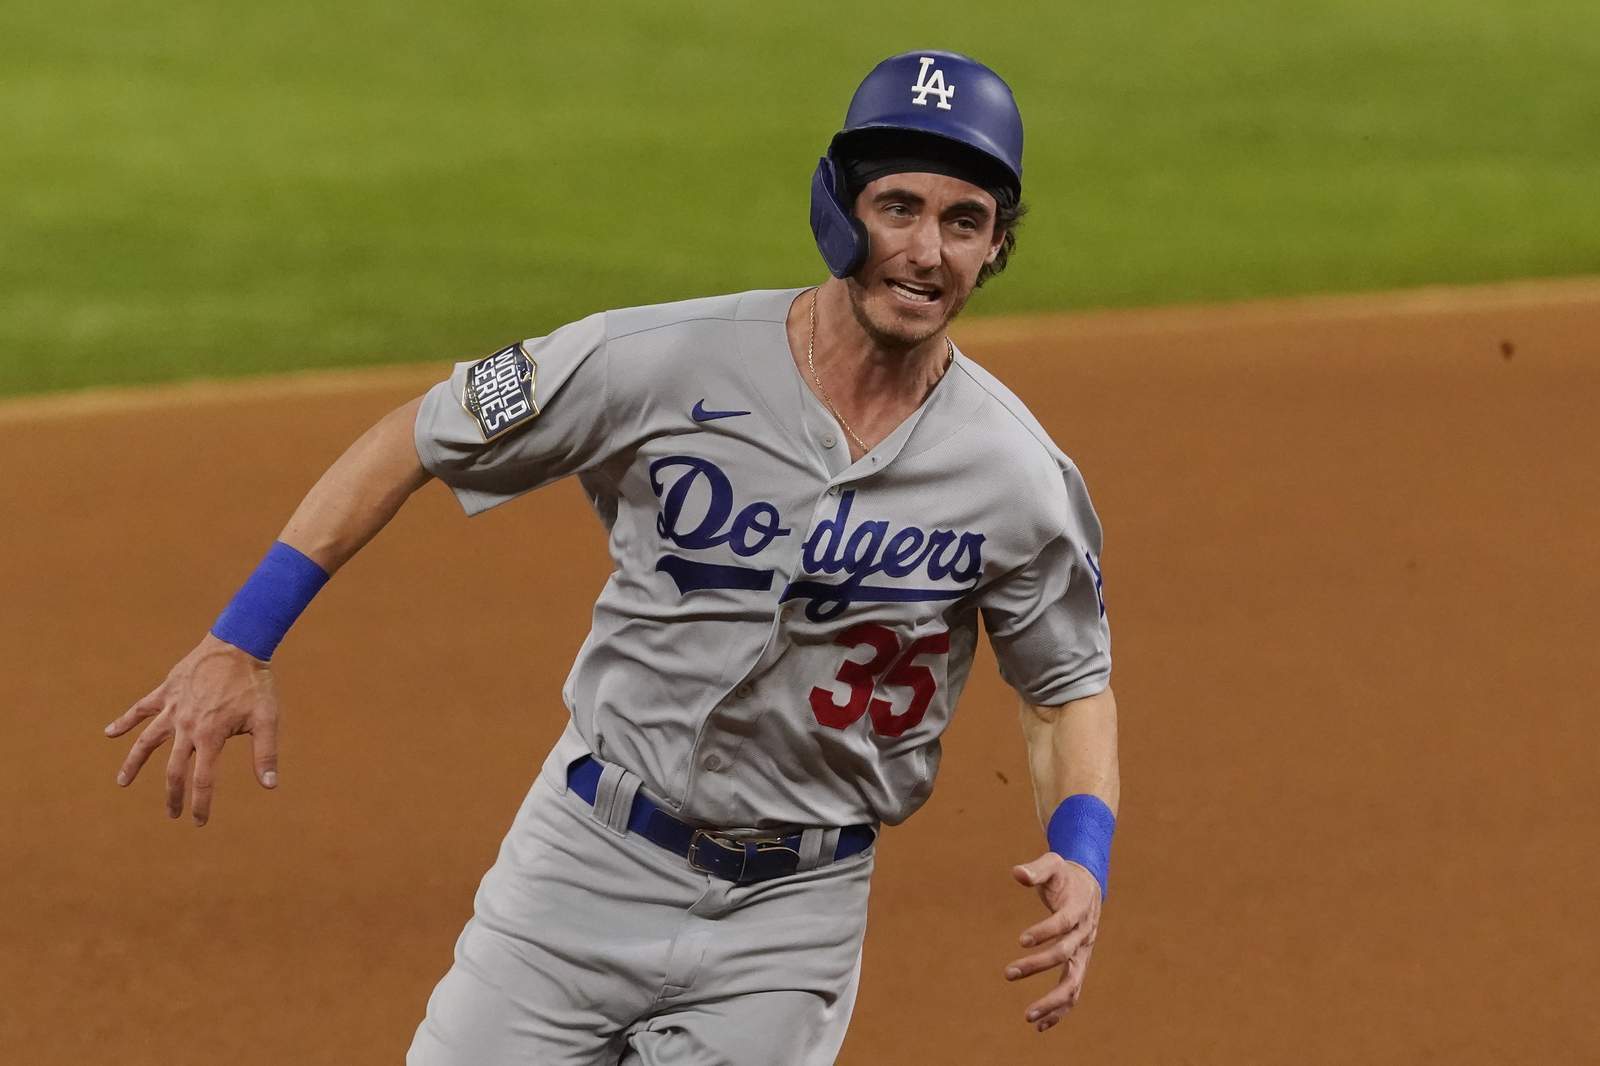 The Latest: Bellinger moved to DH for Game 4 against Rays